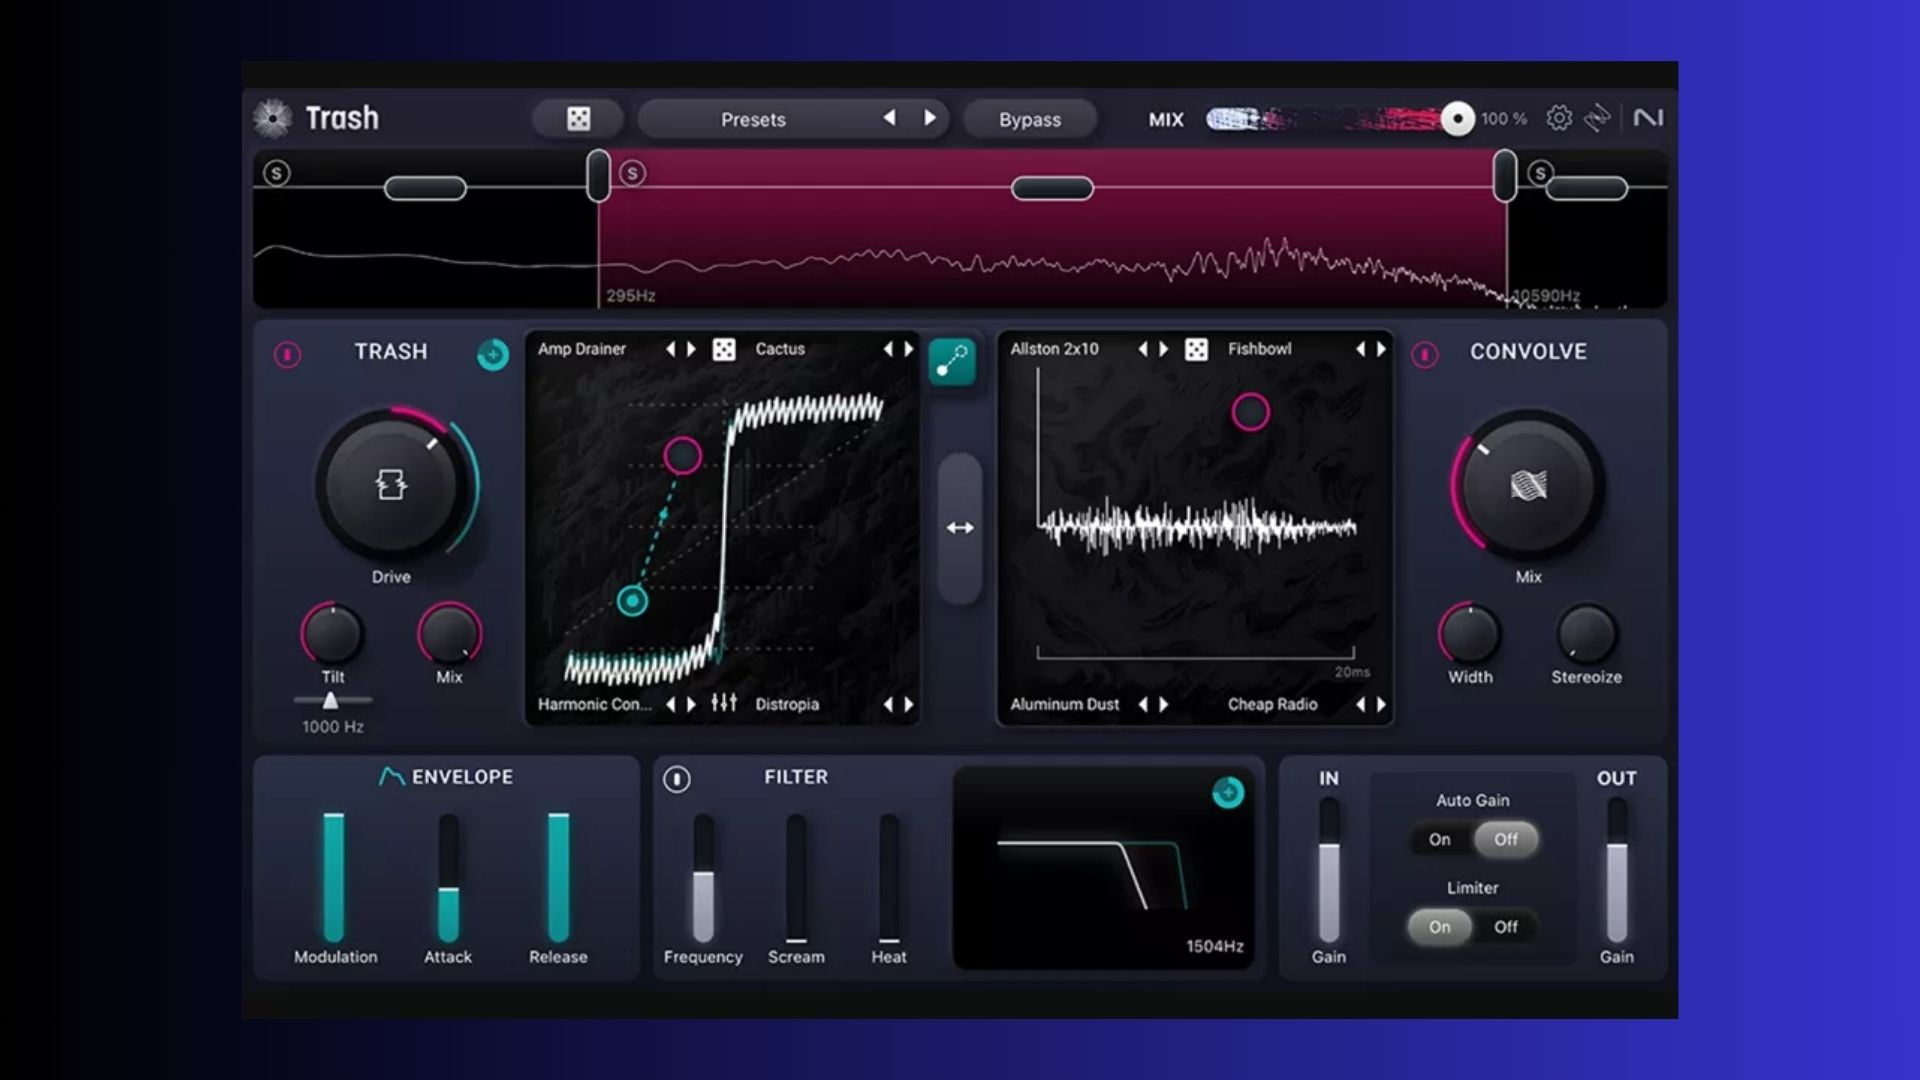 Trash by iZotope: The Iconic Distortion Plugin Returns with New Features